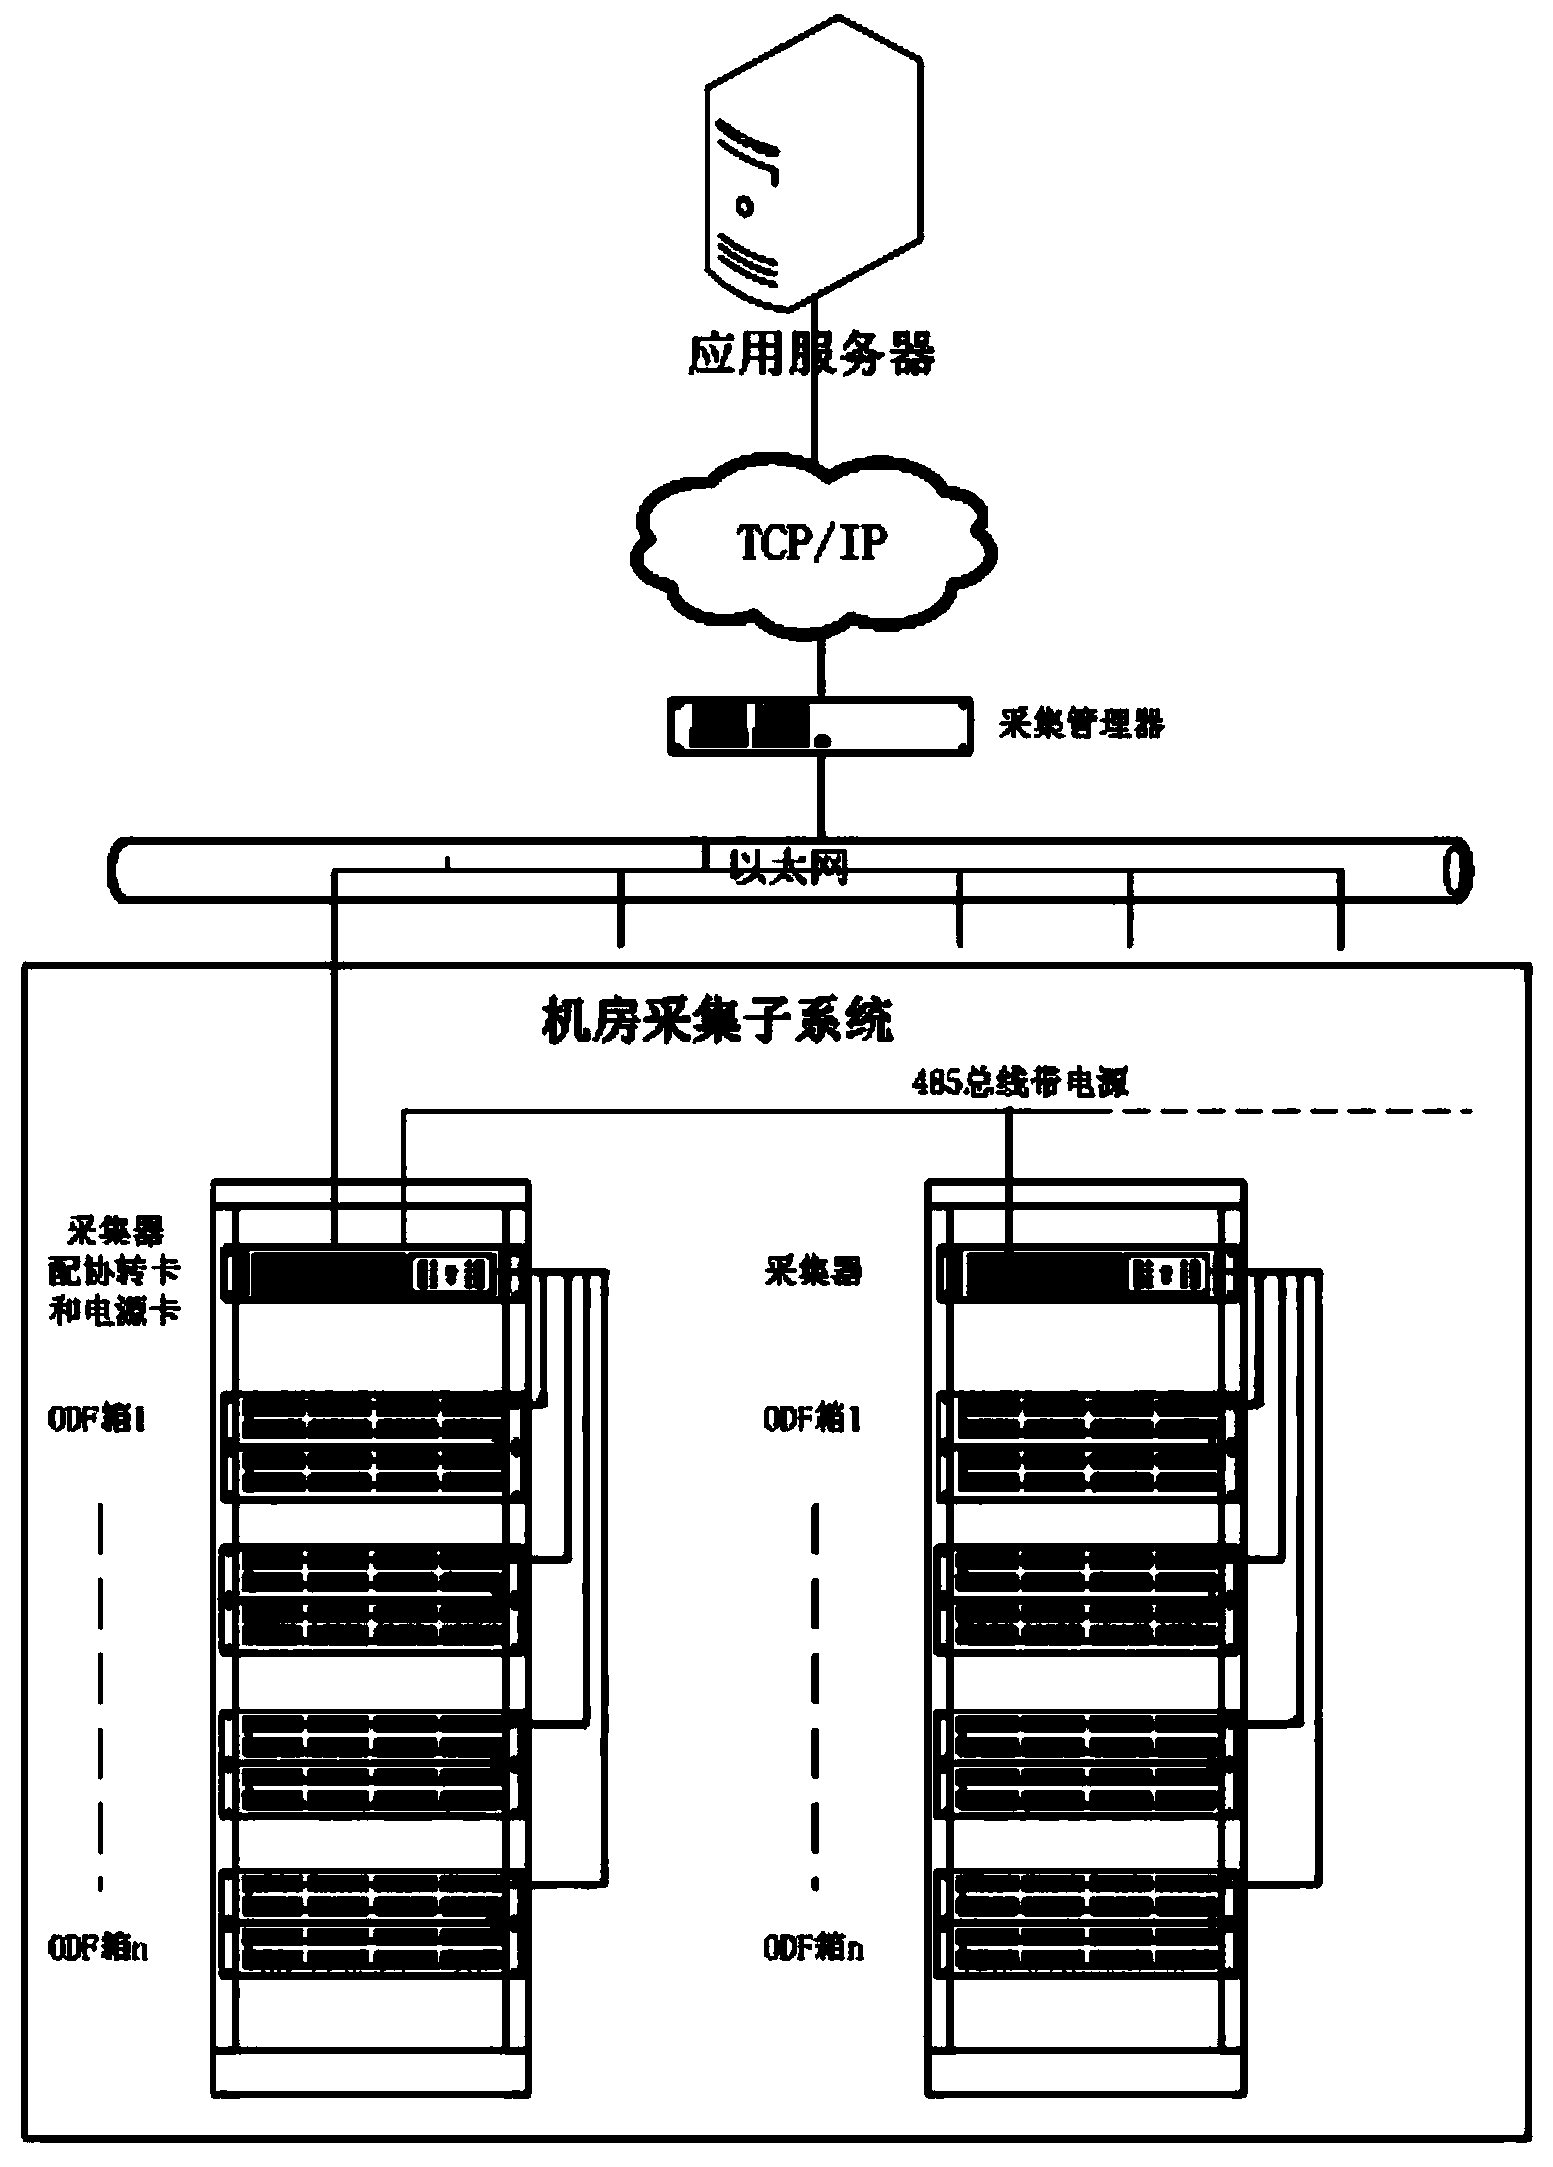 Management method and device of optical fiber system